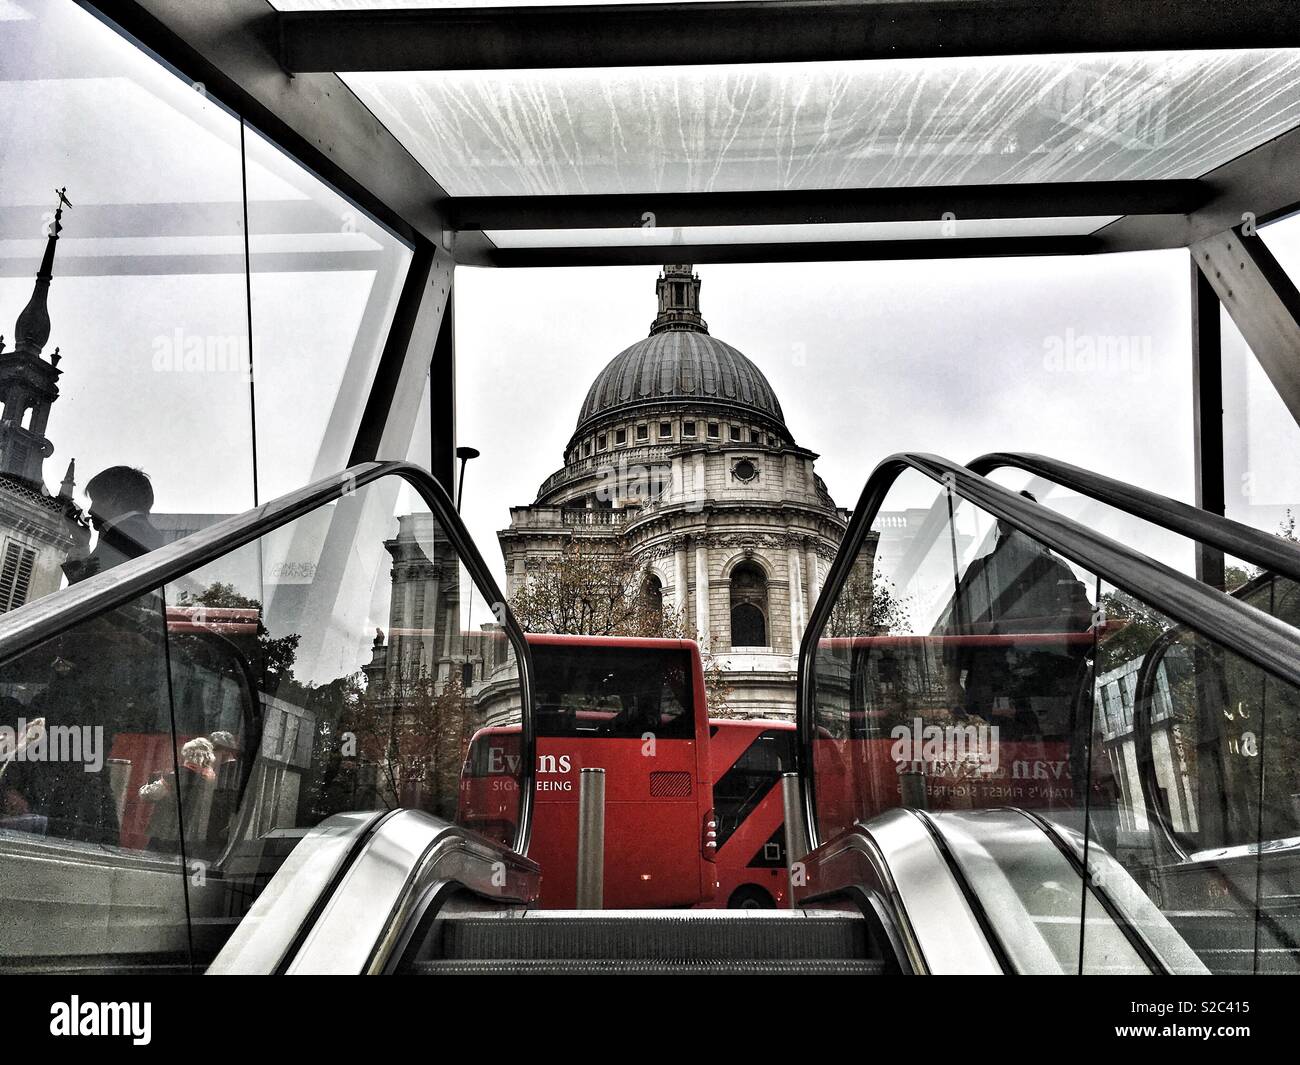 St Paul’s Cathedral seen from 1 New Change shopping centre in London, England on October 15 2018 Stock Photo